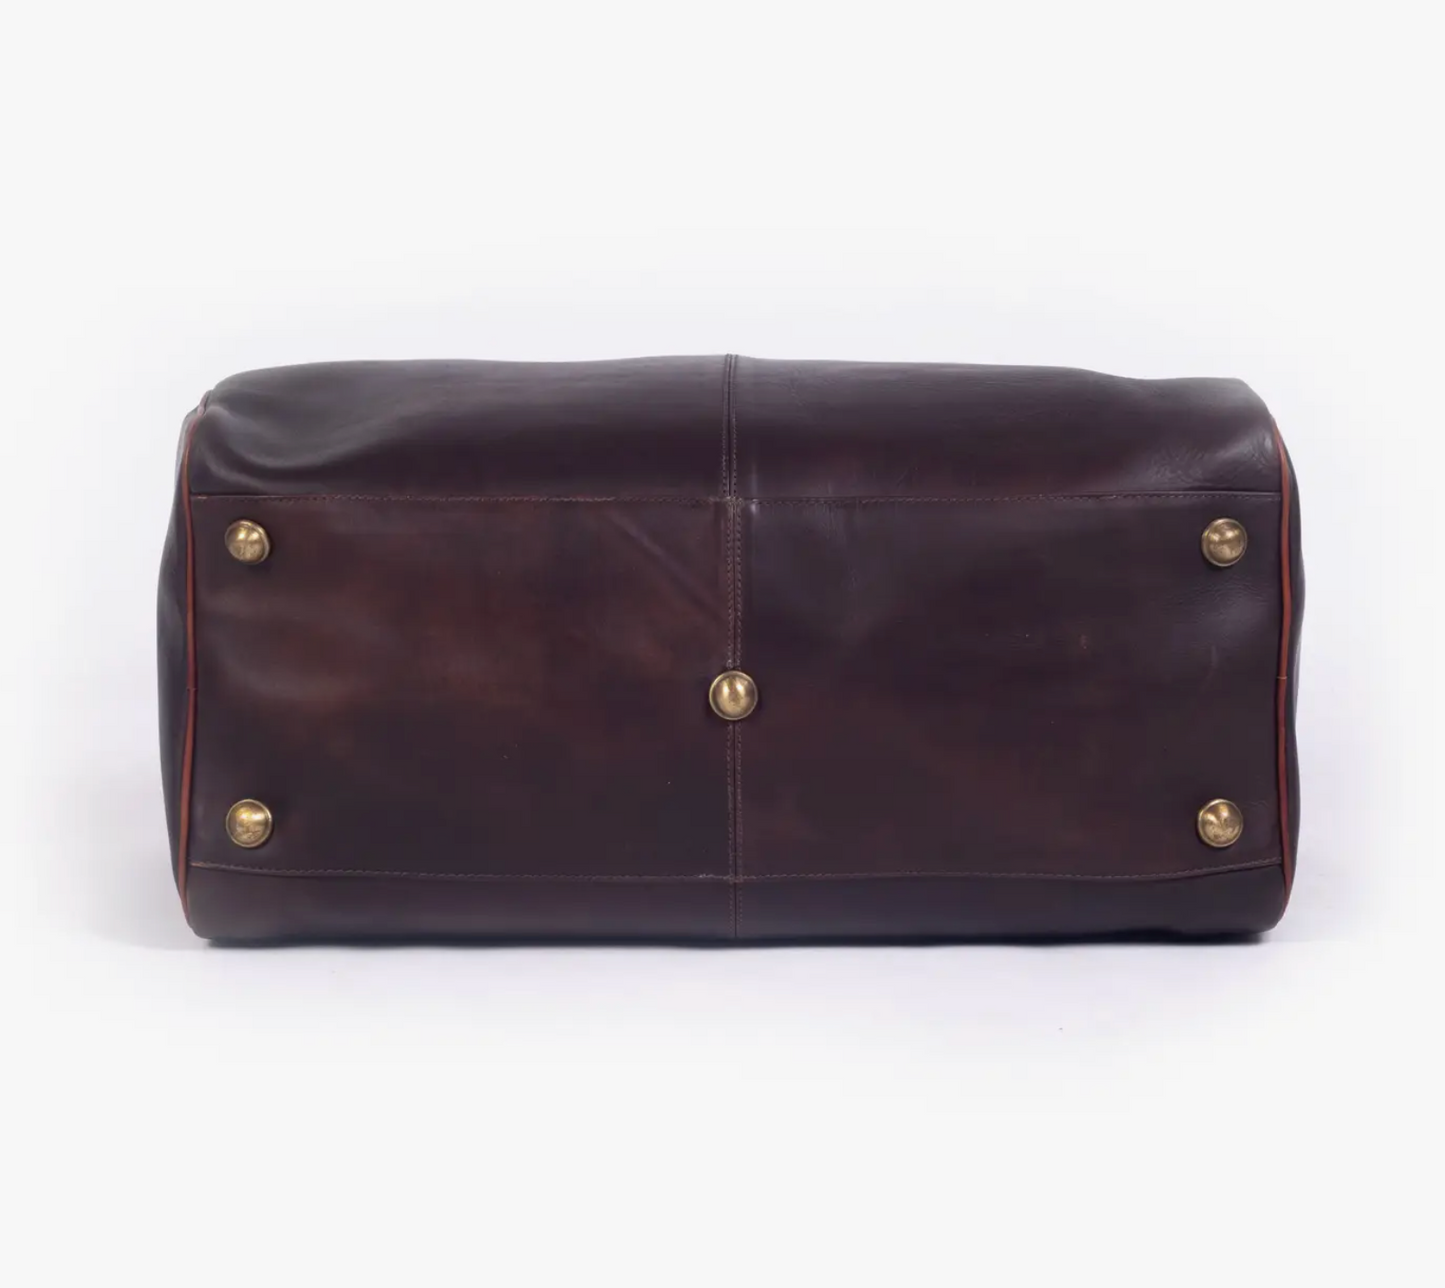 The Clifford Leather Duffle Bag